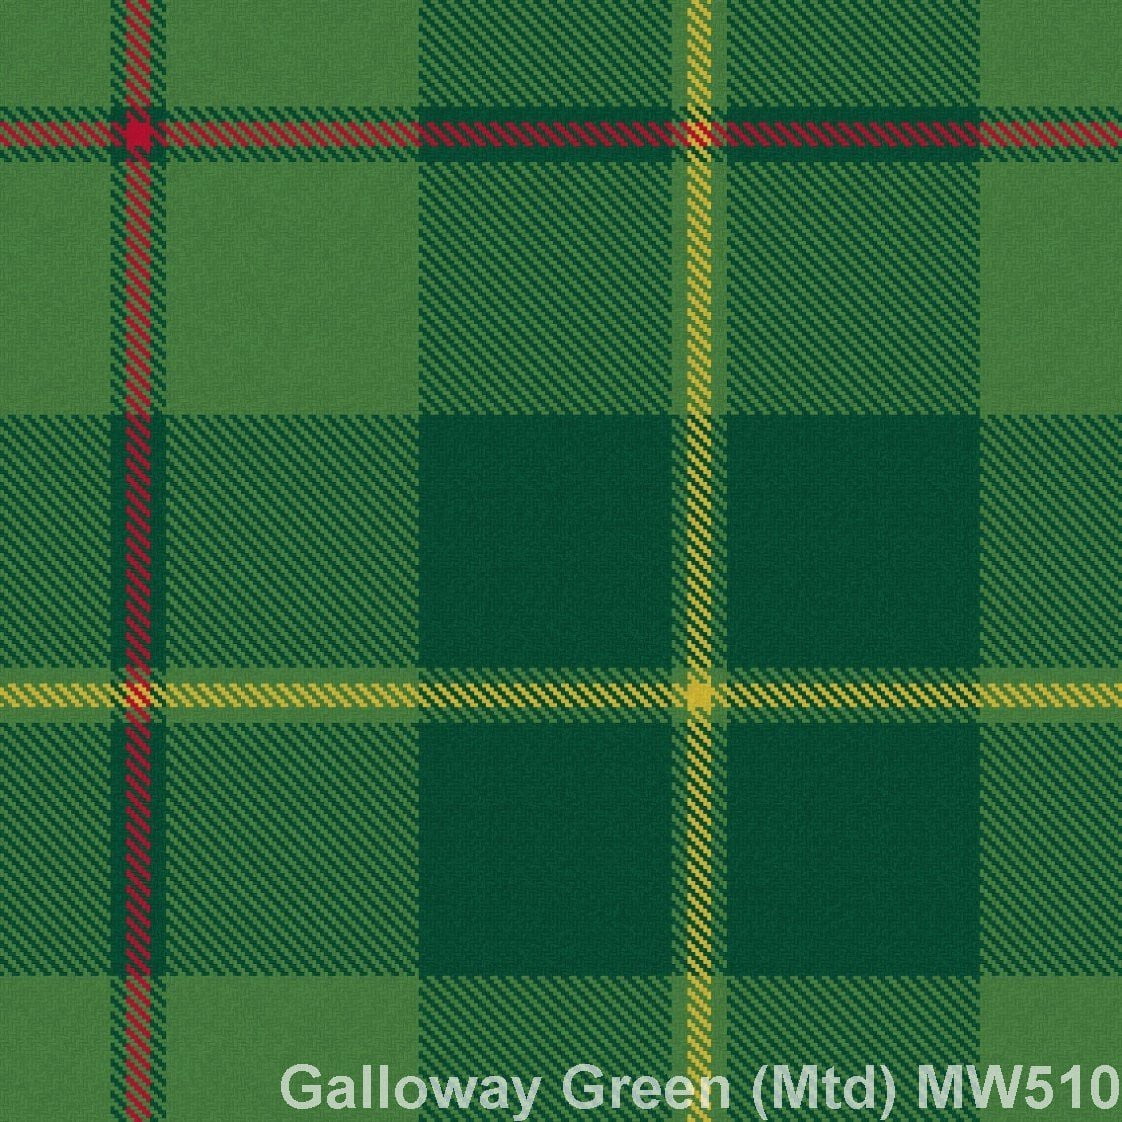 Galloway Green Muted